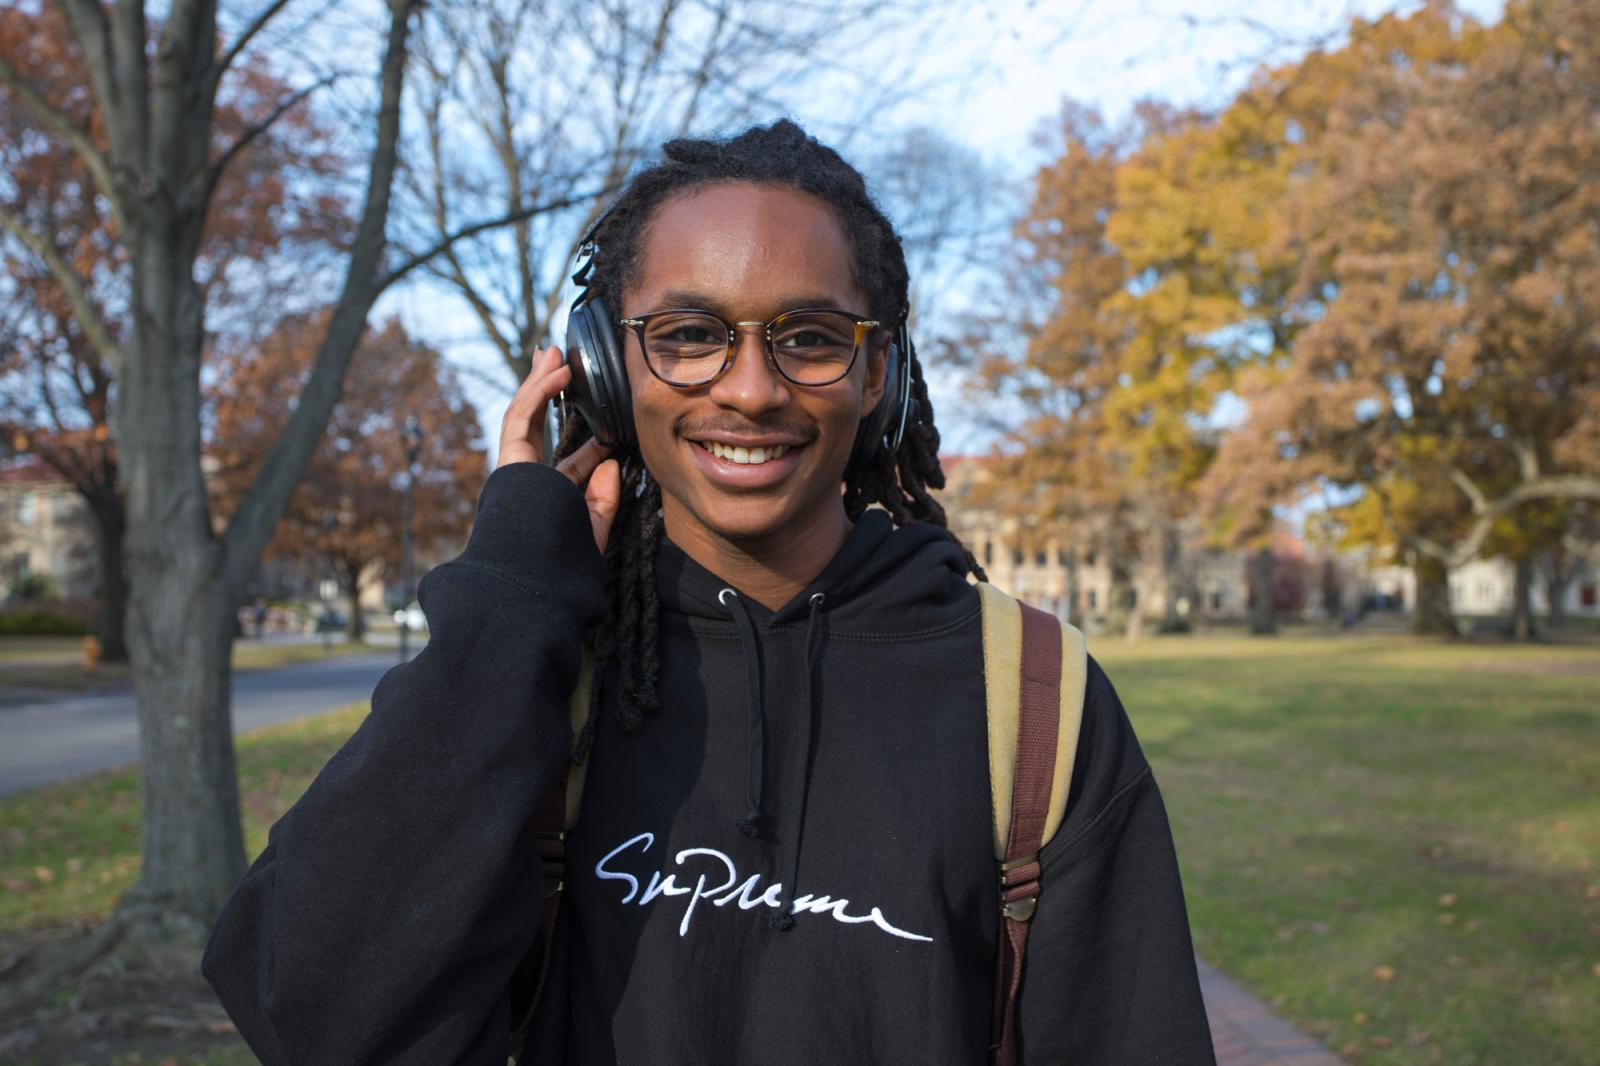 Student wearing headphones, outdoors in fall.